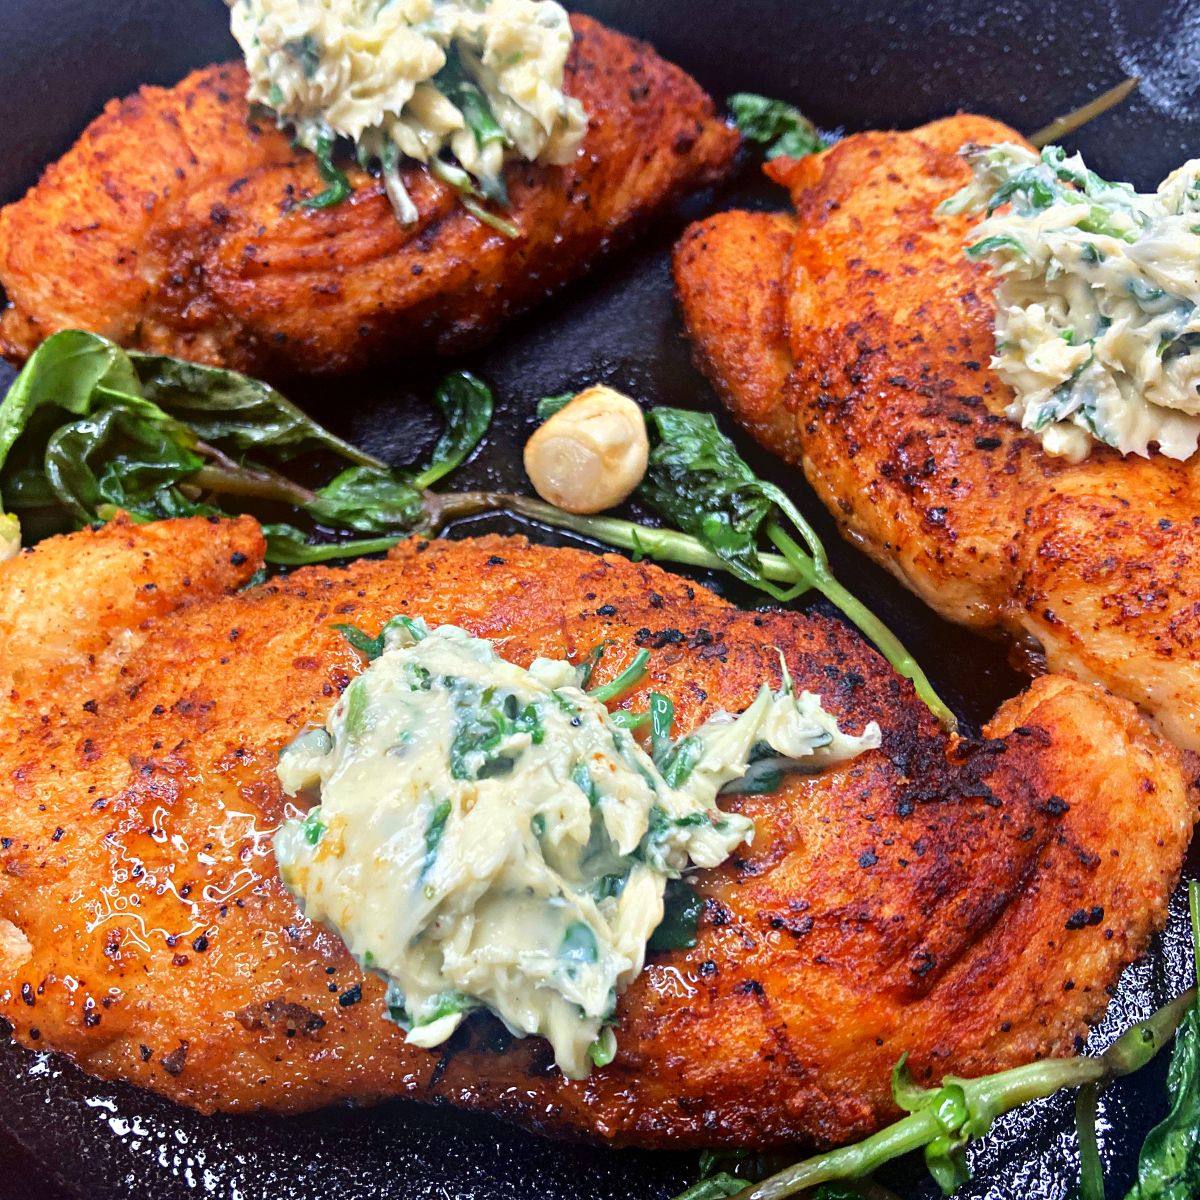 Juicy Cast Iron Skillet Chicken Breast Recipe in No Time